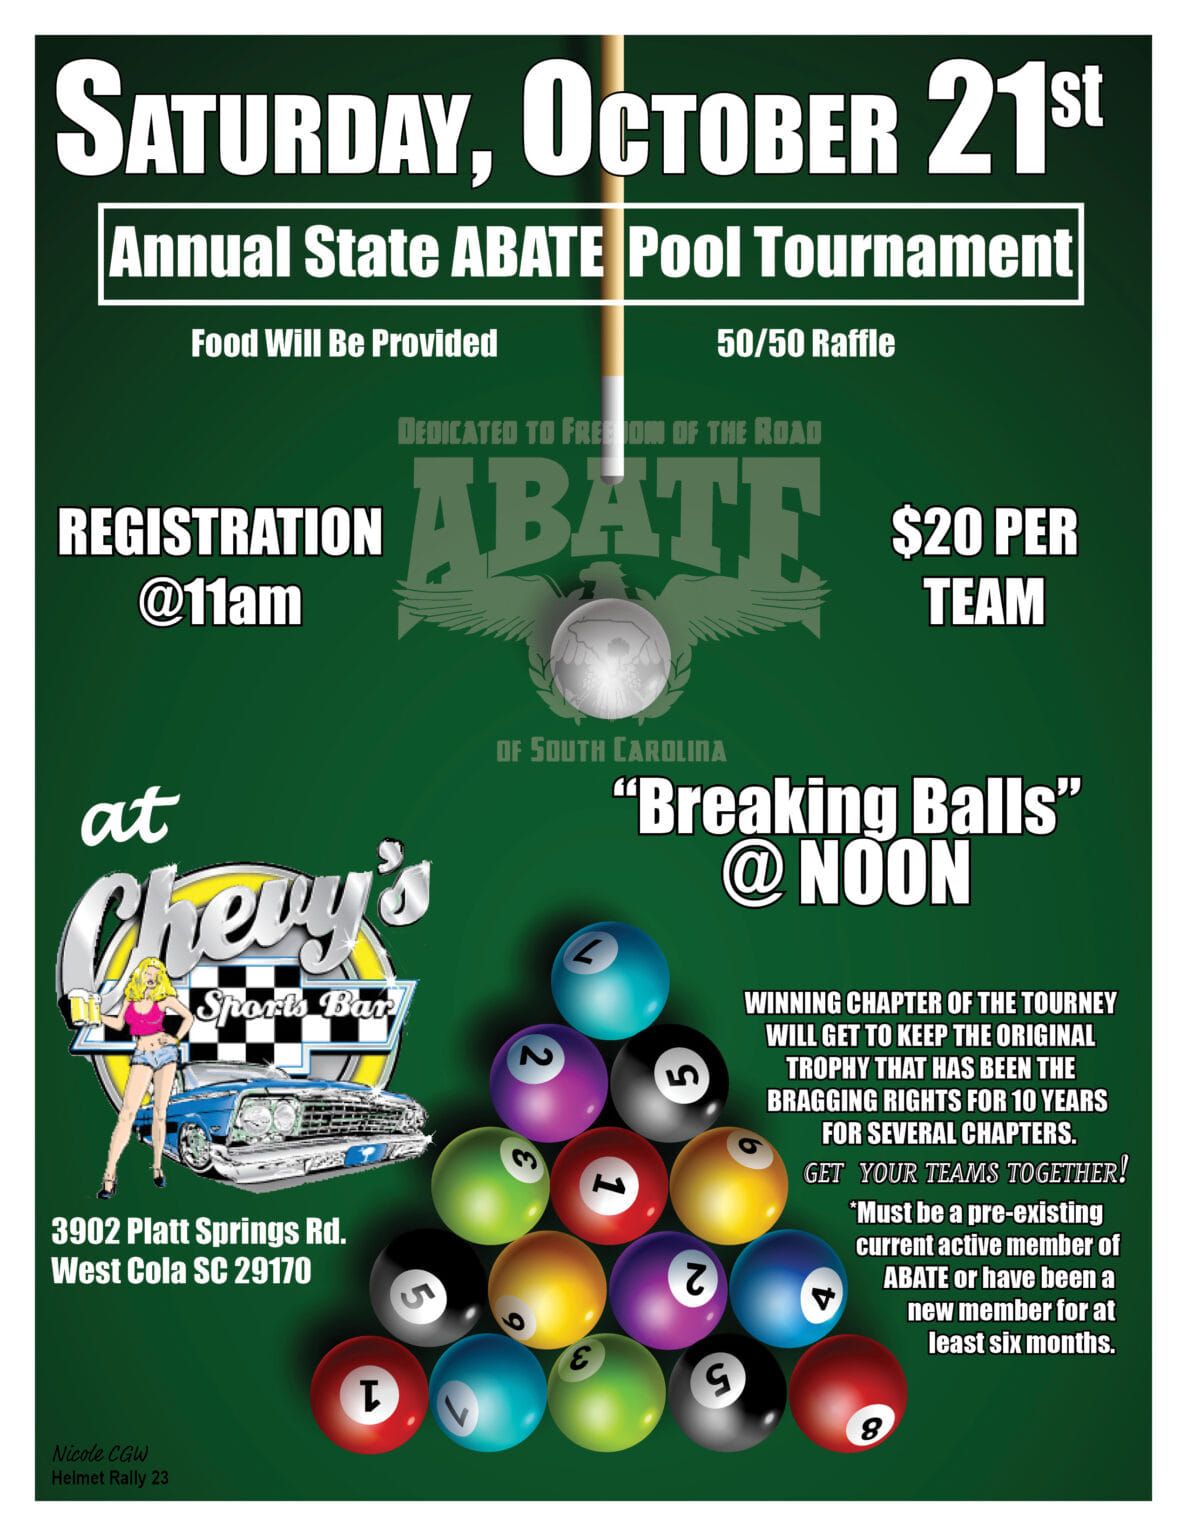 ABATE of South Carolina's Annual State Pool Tournament